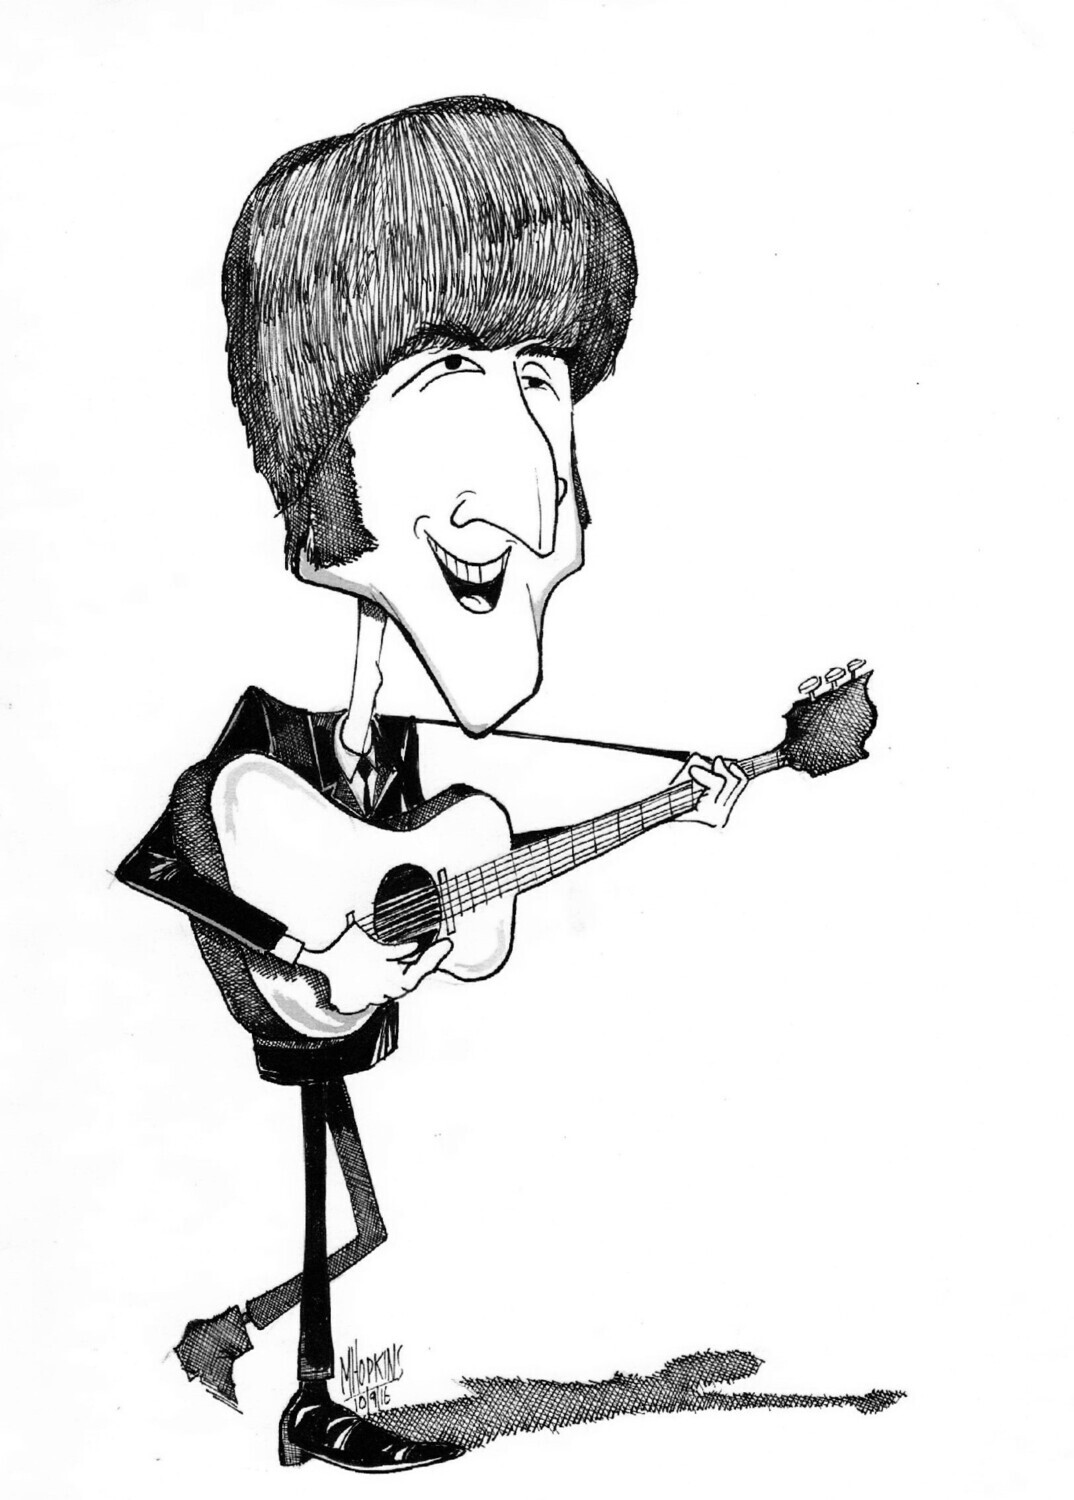 John Lennon - Limited Edition Signed Giclée Prints from $50 to $200